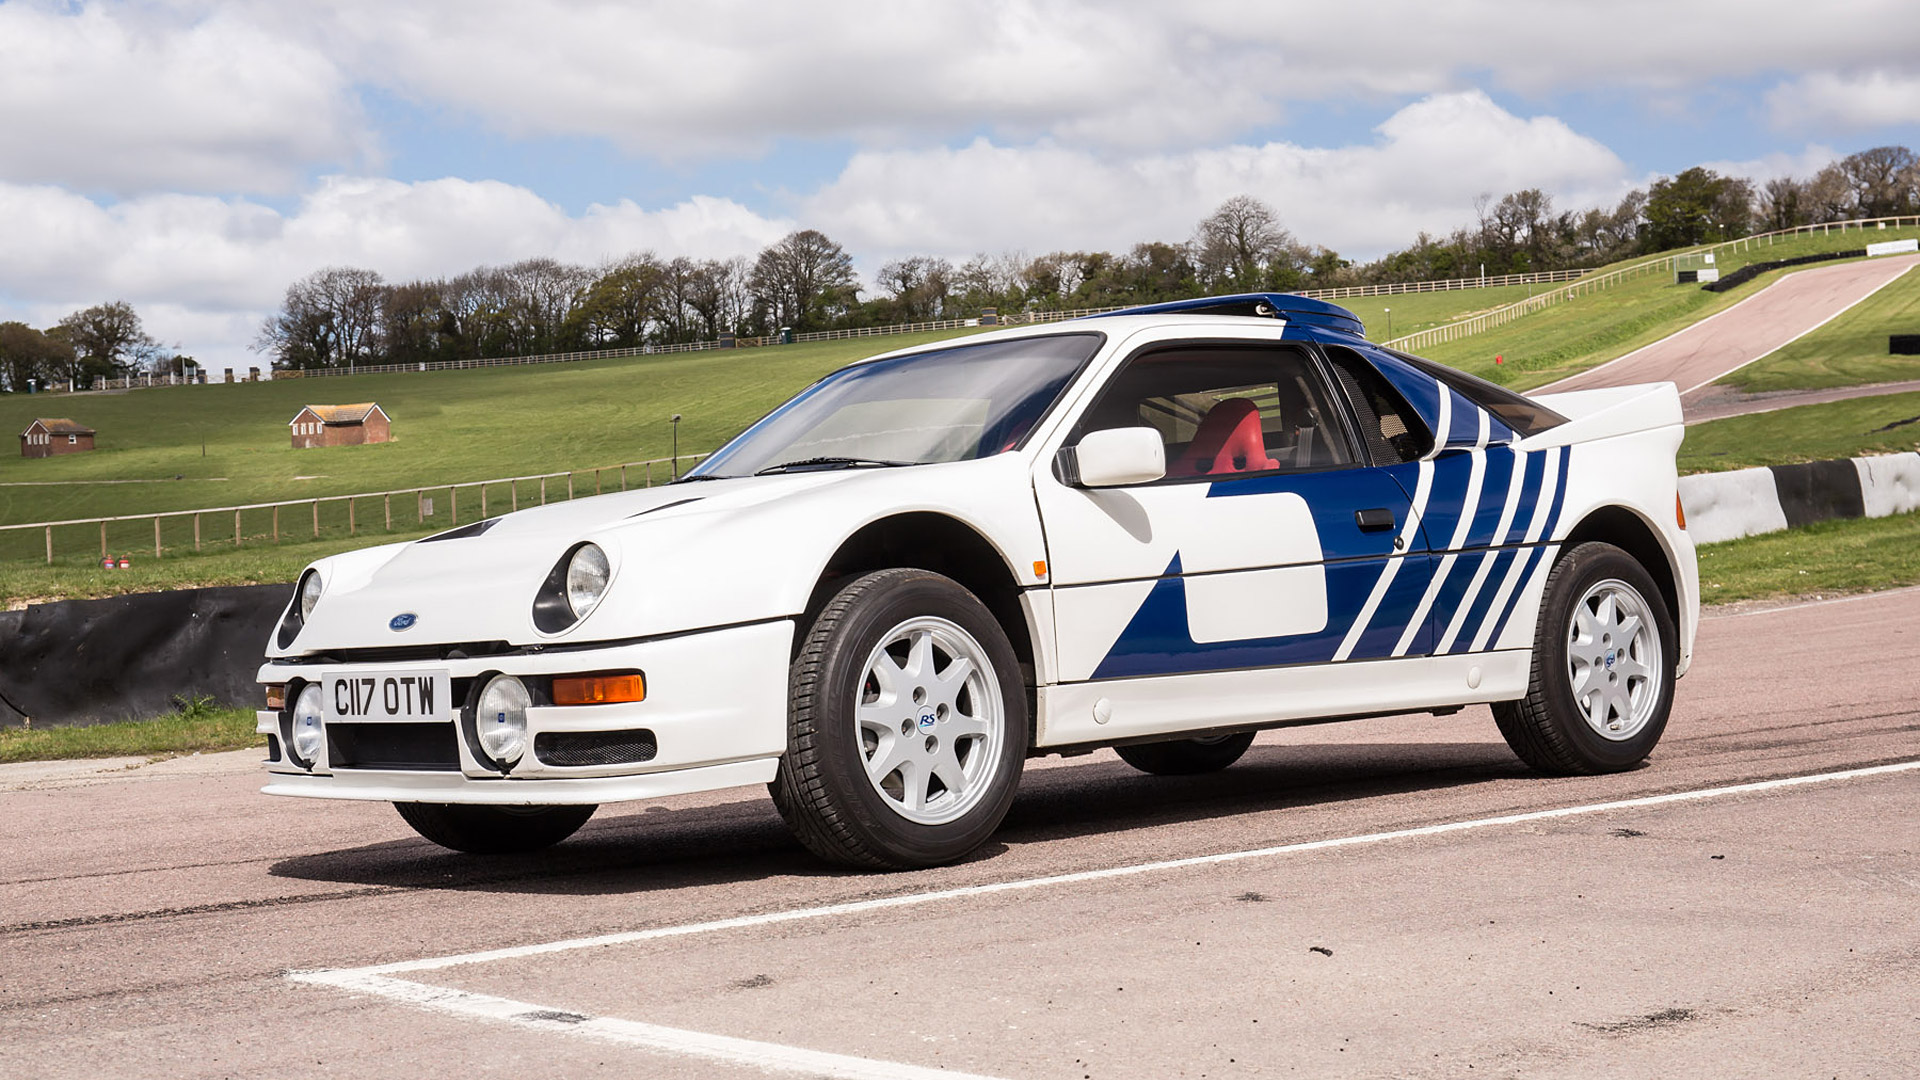 Vehicles Ford RS200 Evolution HD Wallpaper | Background Image